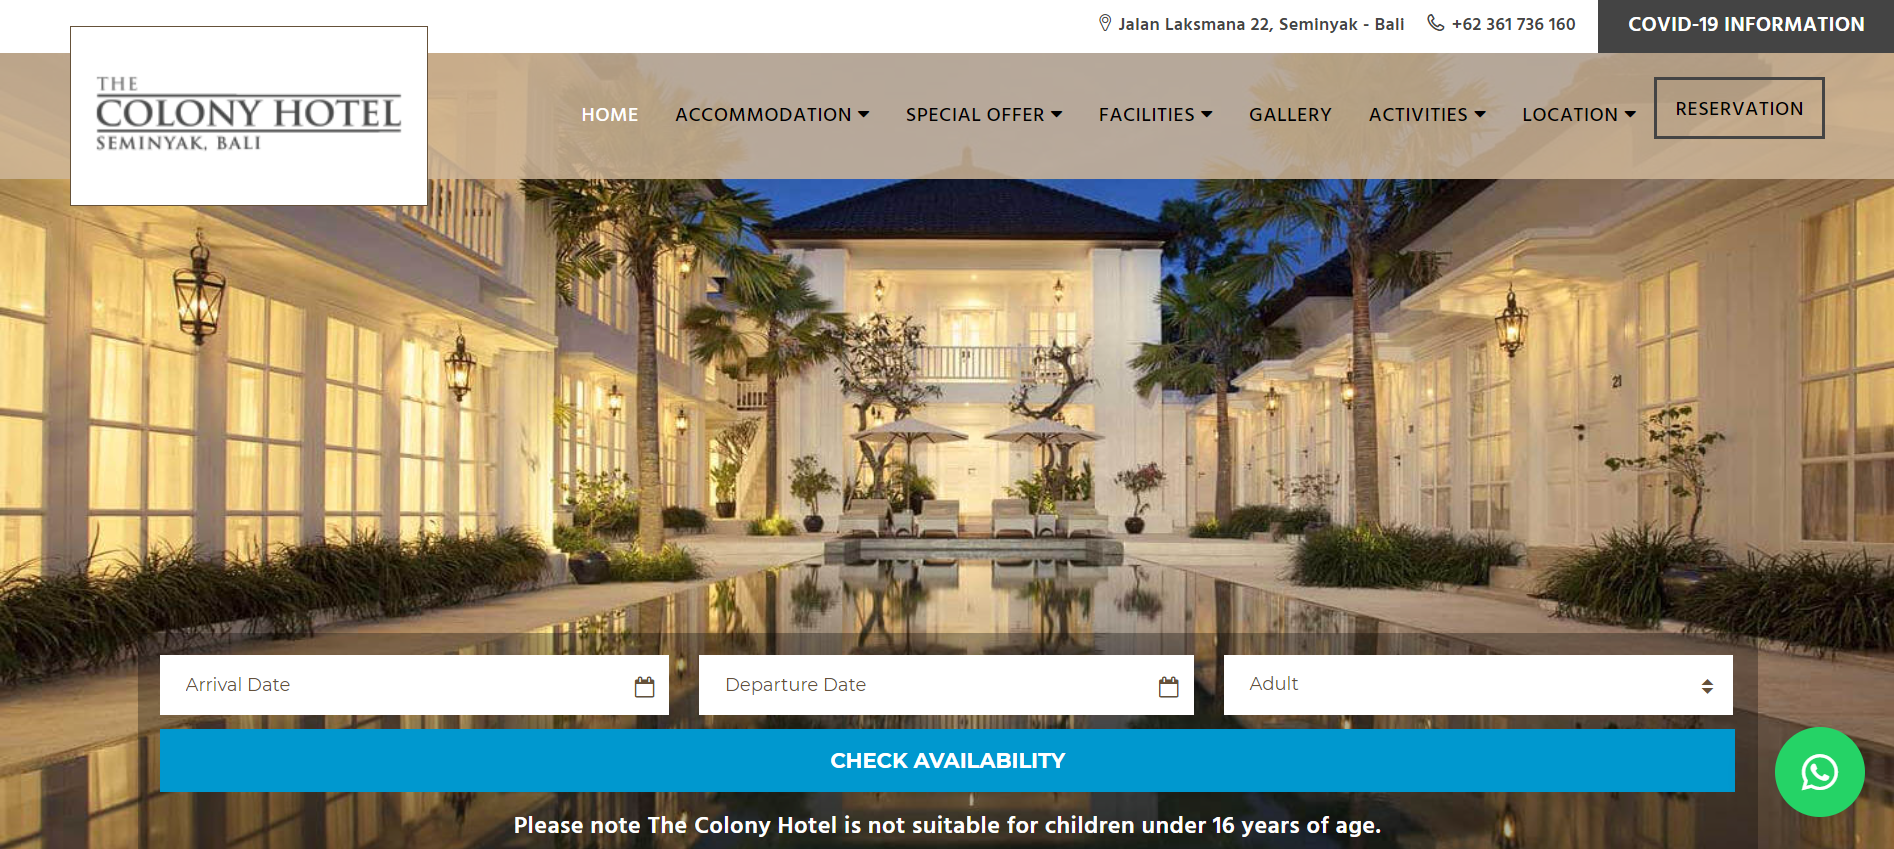 The colony hotel home page